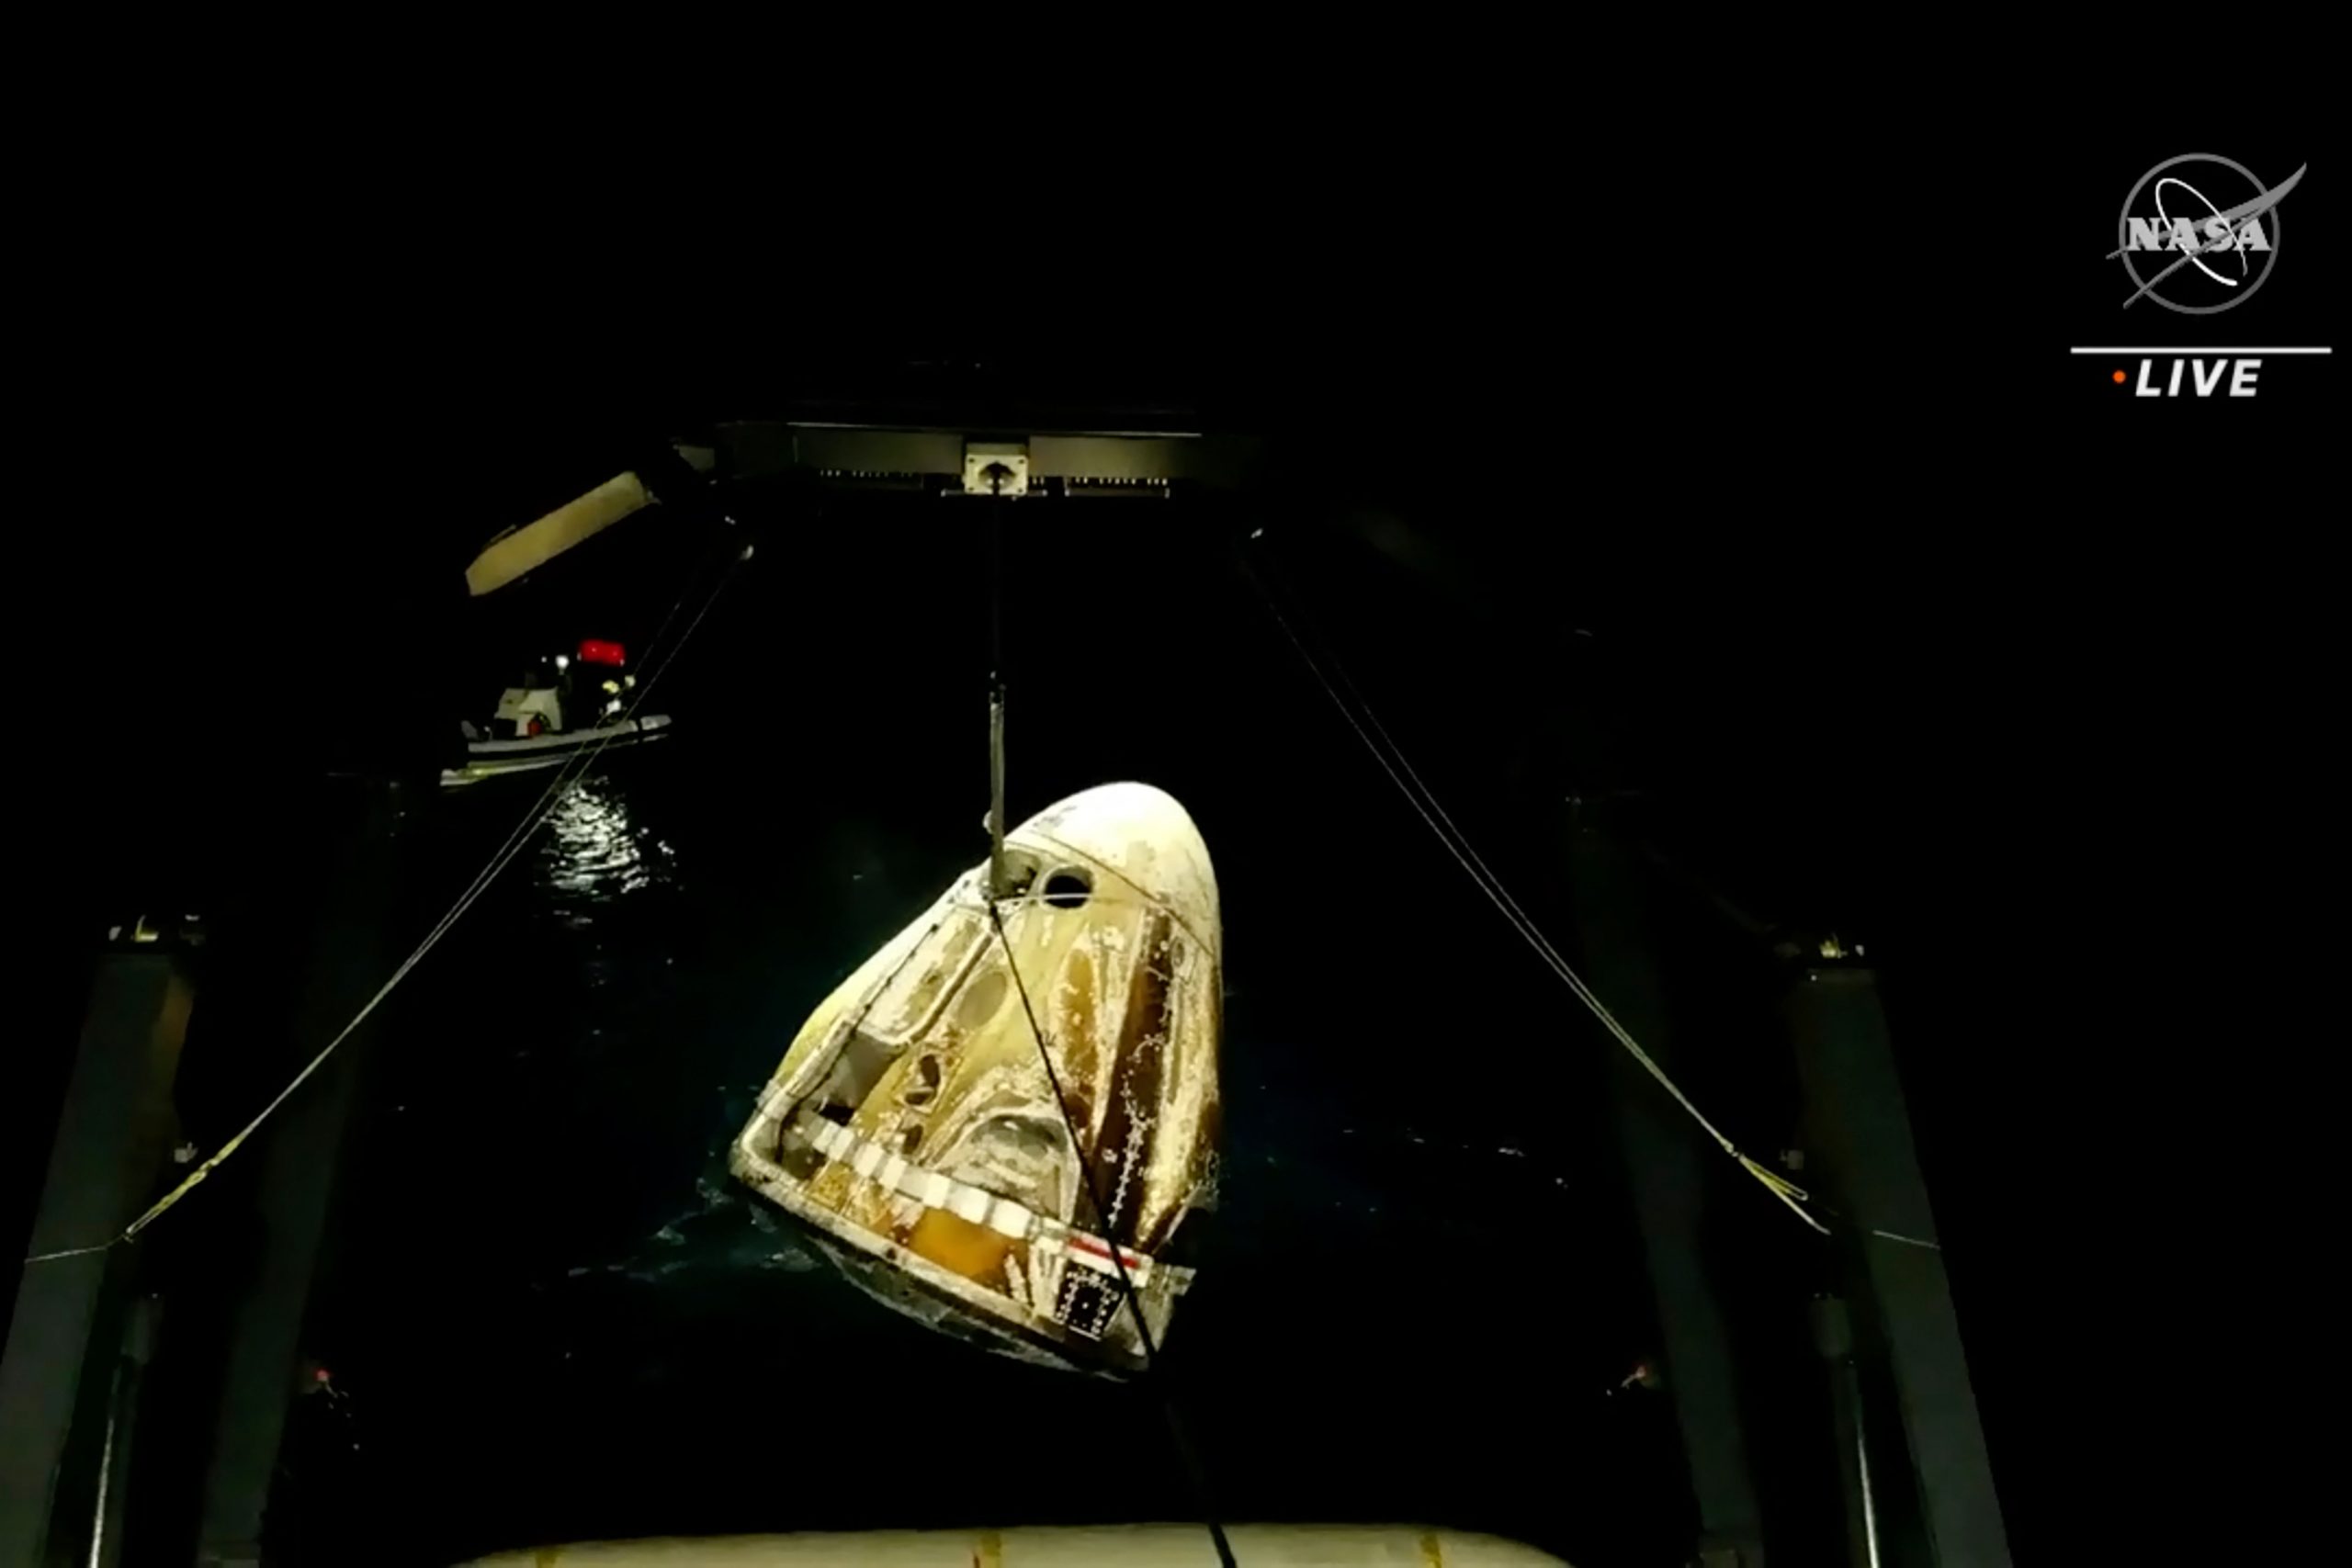 Four astronauts from SpaceX return home with midnight splashdown